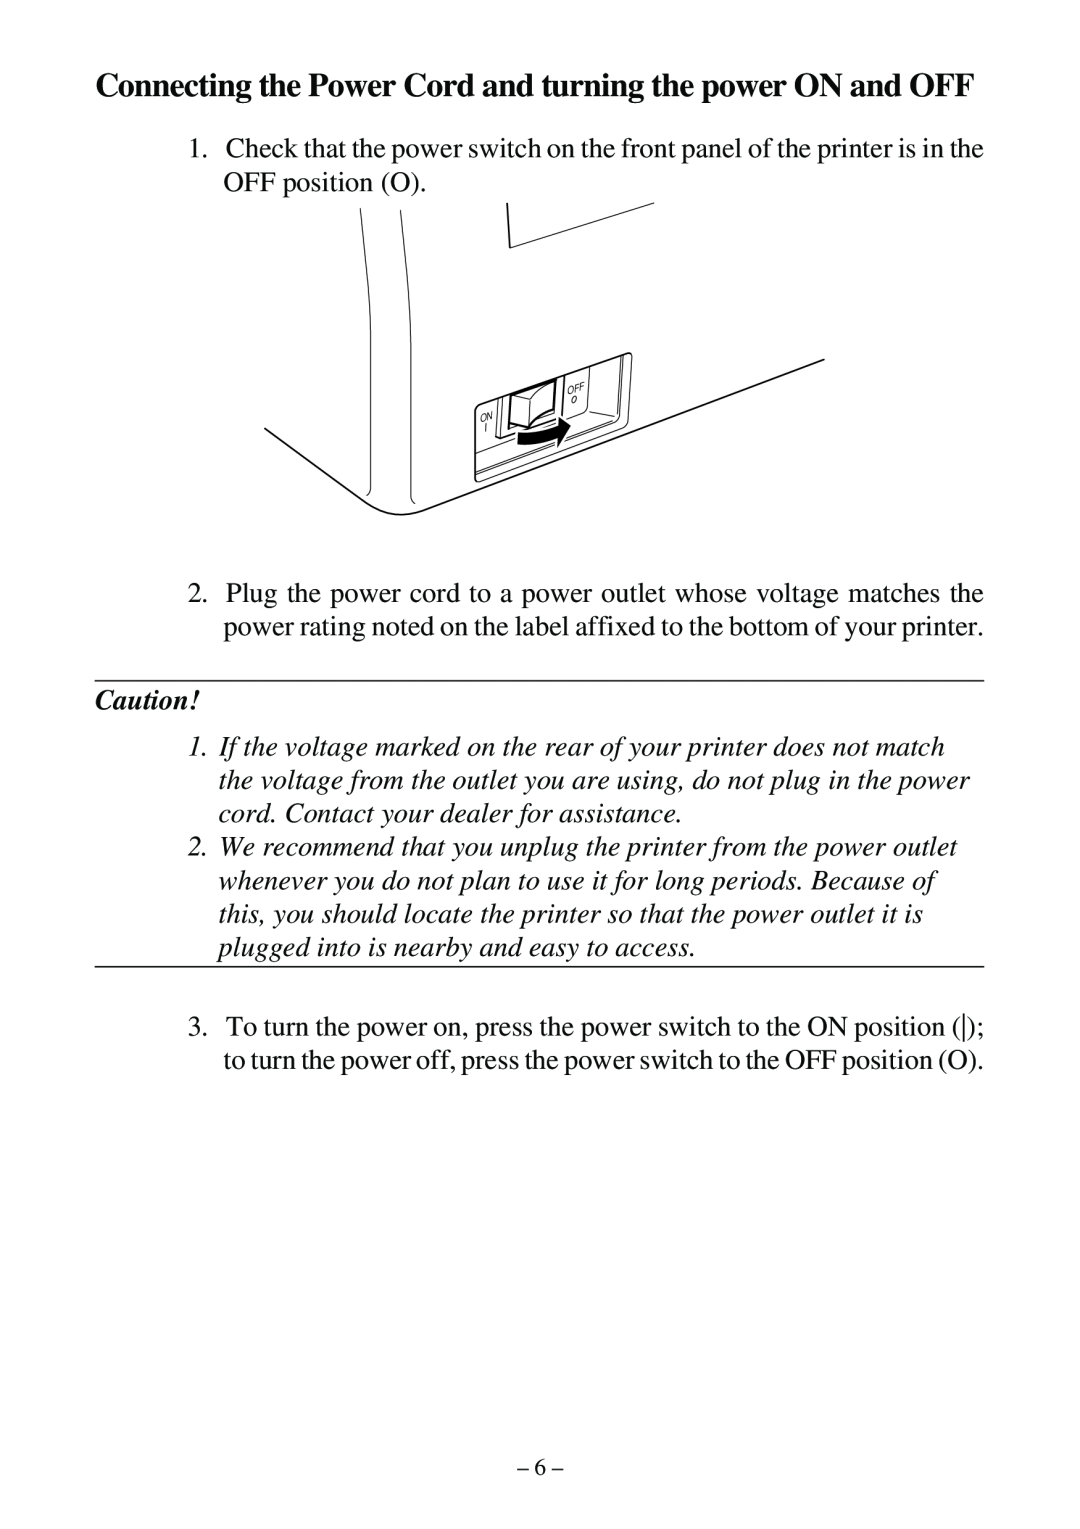 Star Micronics LC-500 user manual Connecting the Power Cord and turning the power ON and OFF 